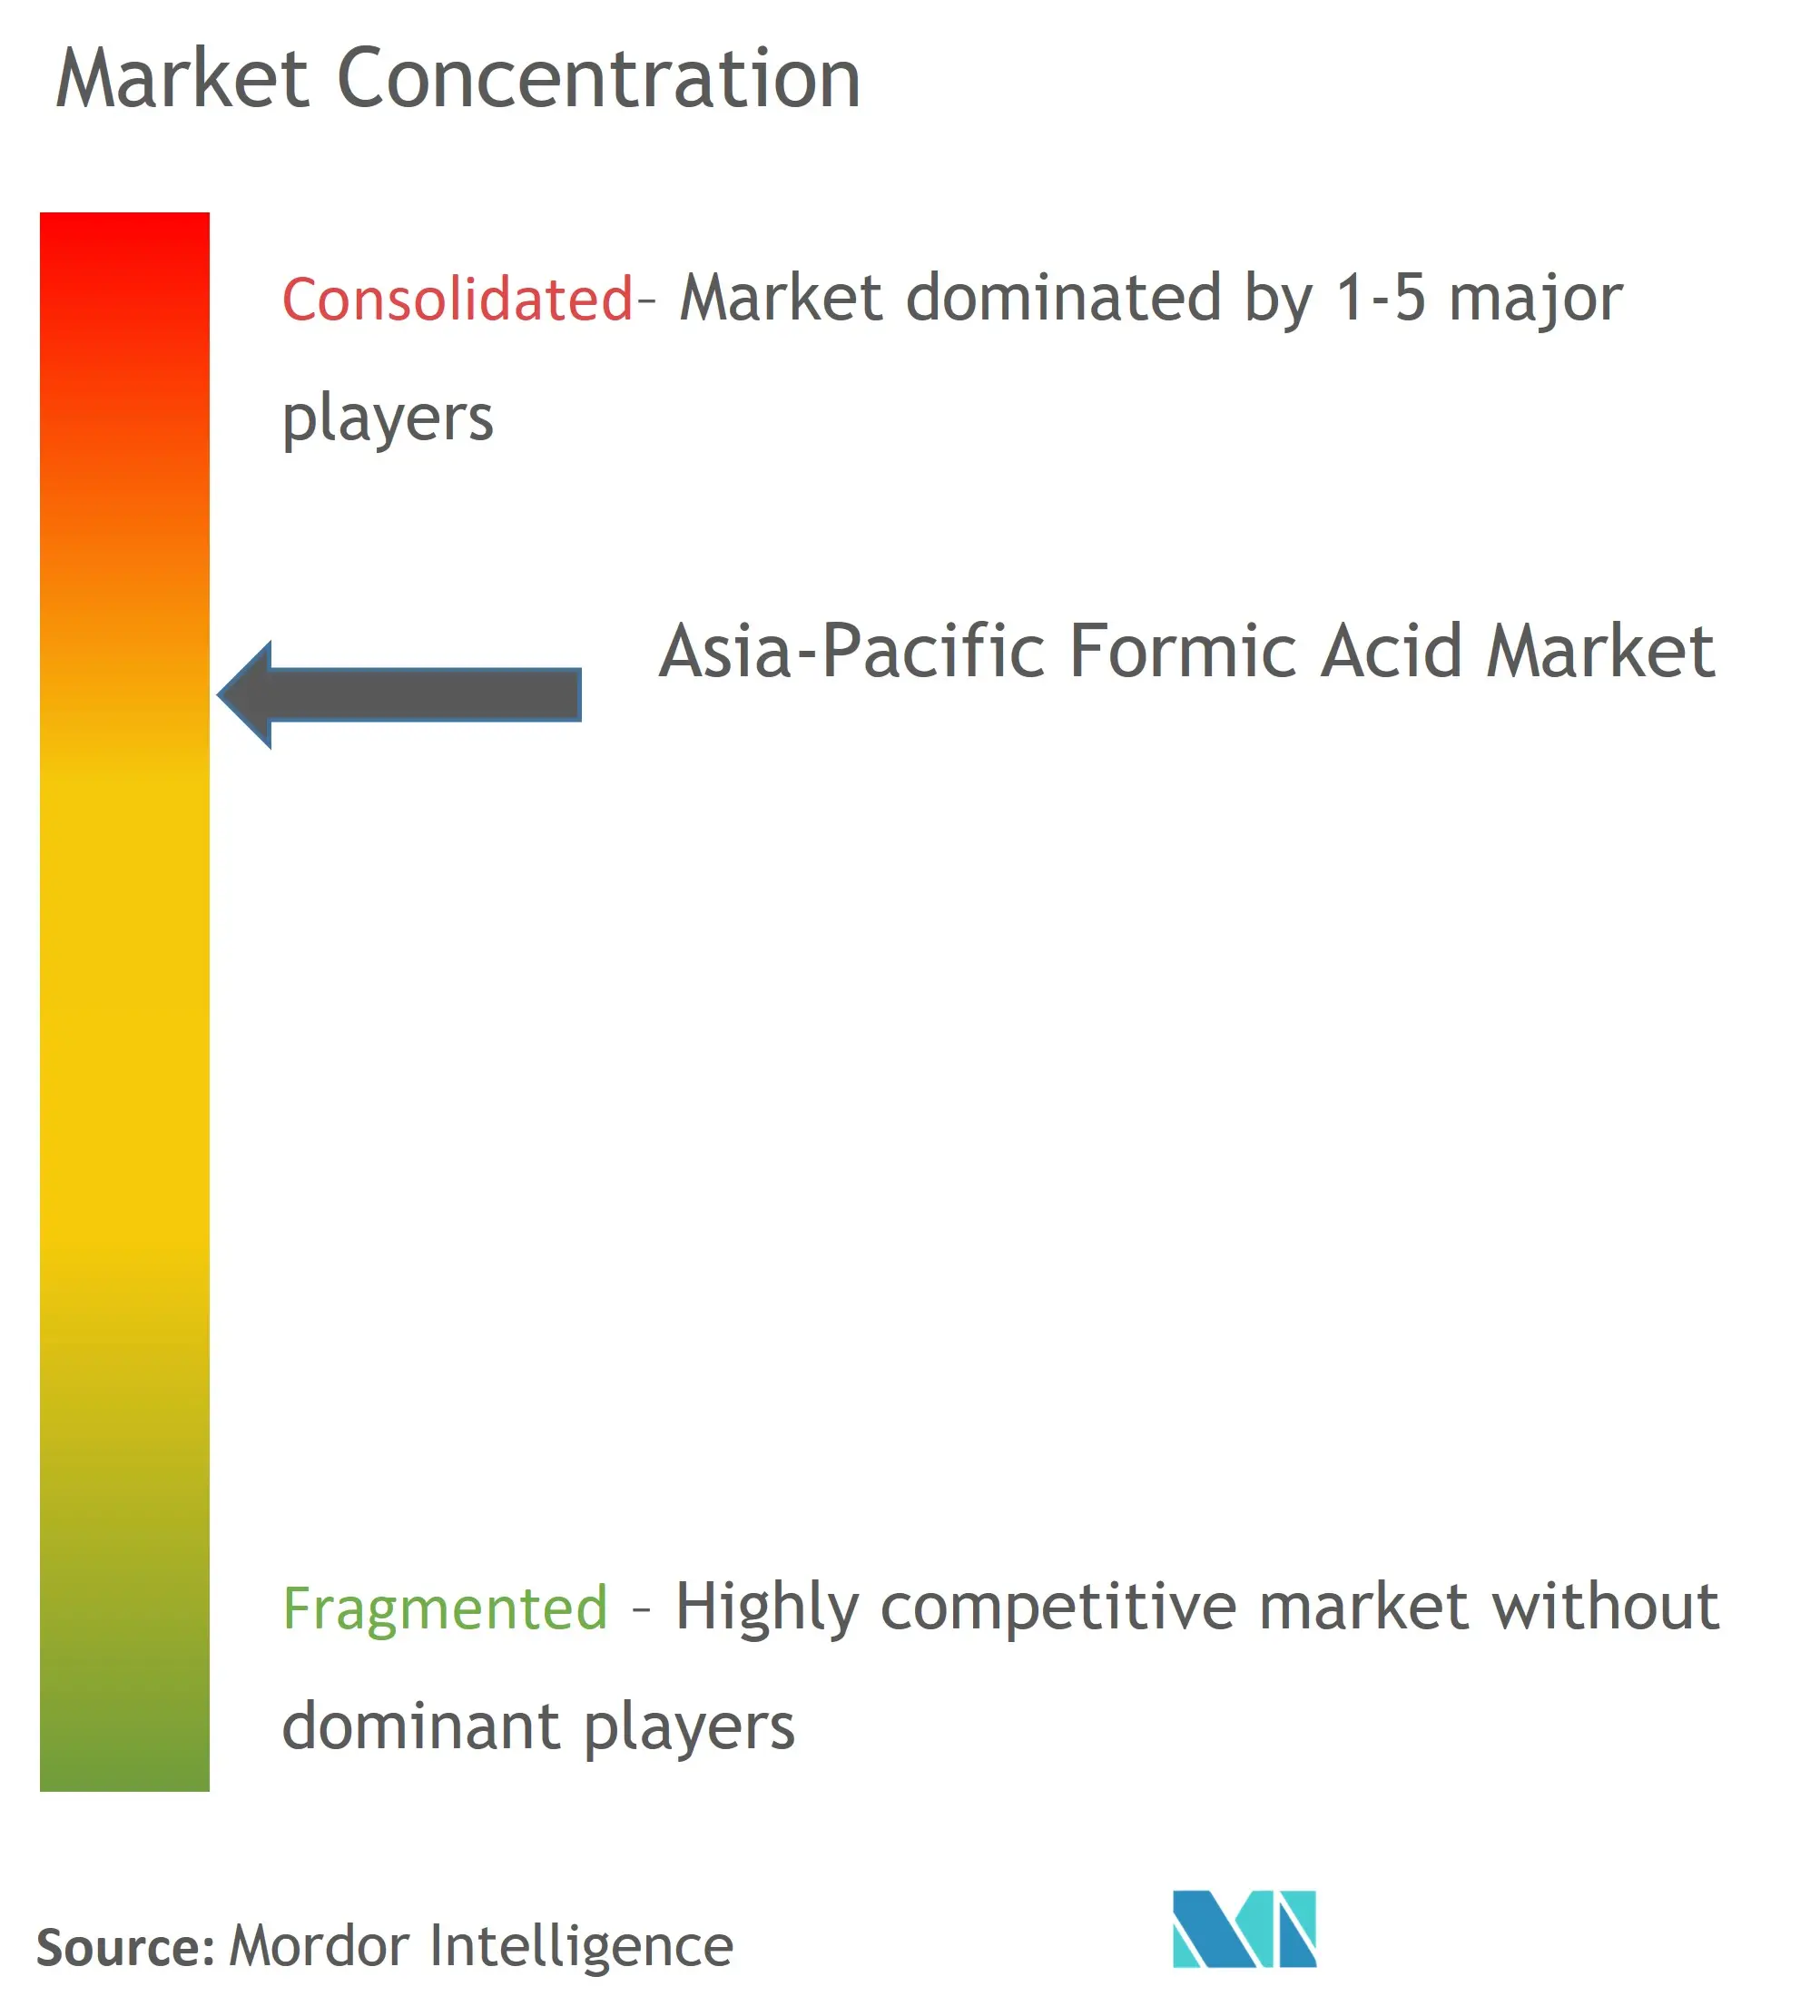 Asia-Pacific Formic Acid Market Concentration